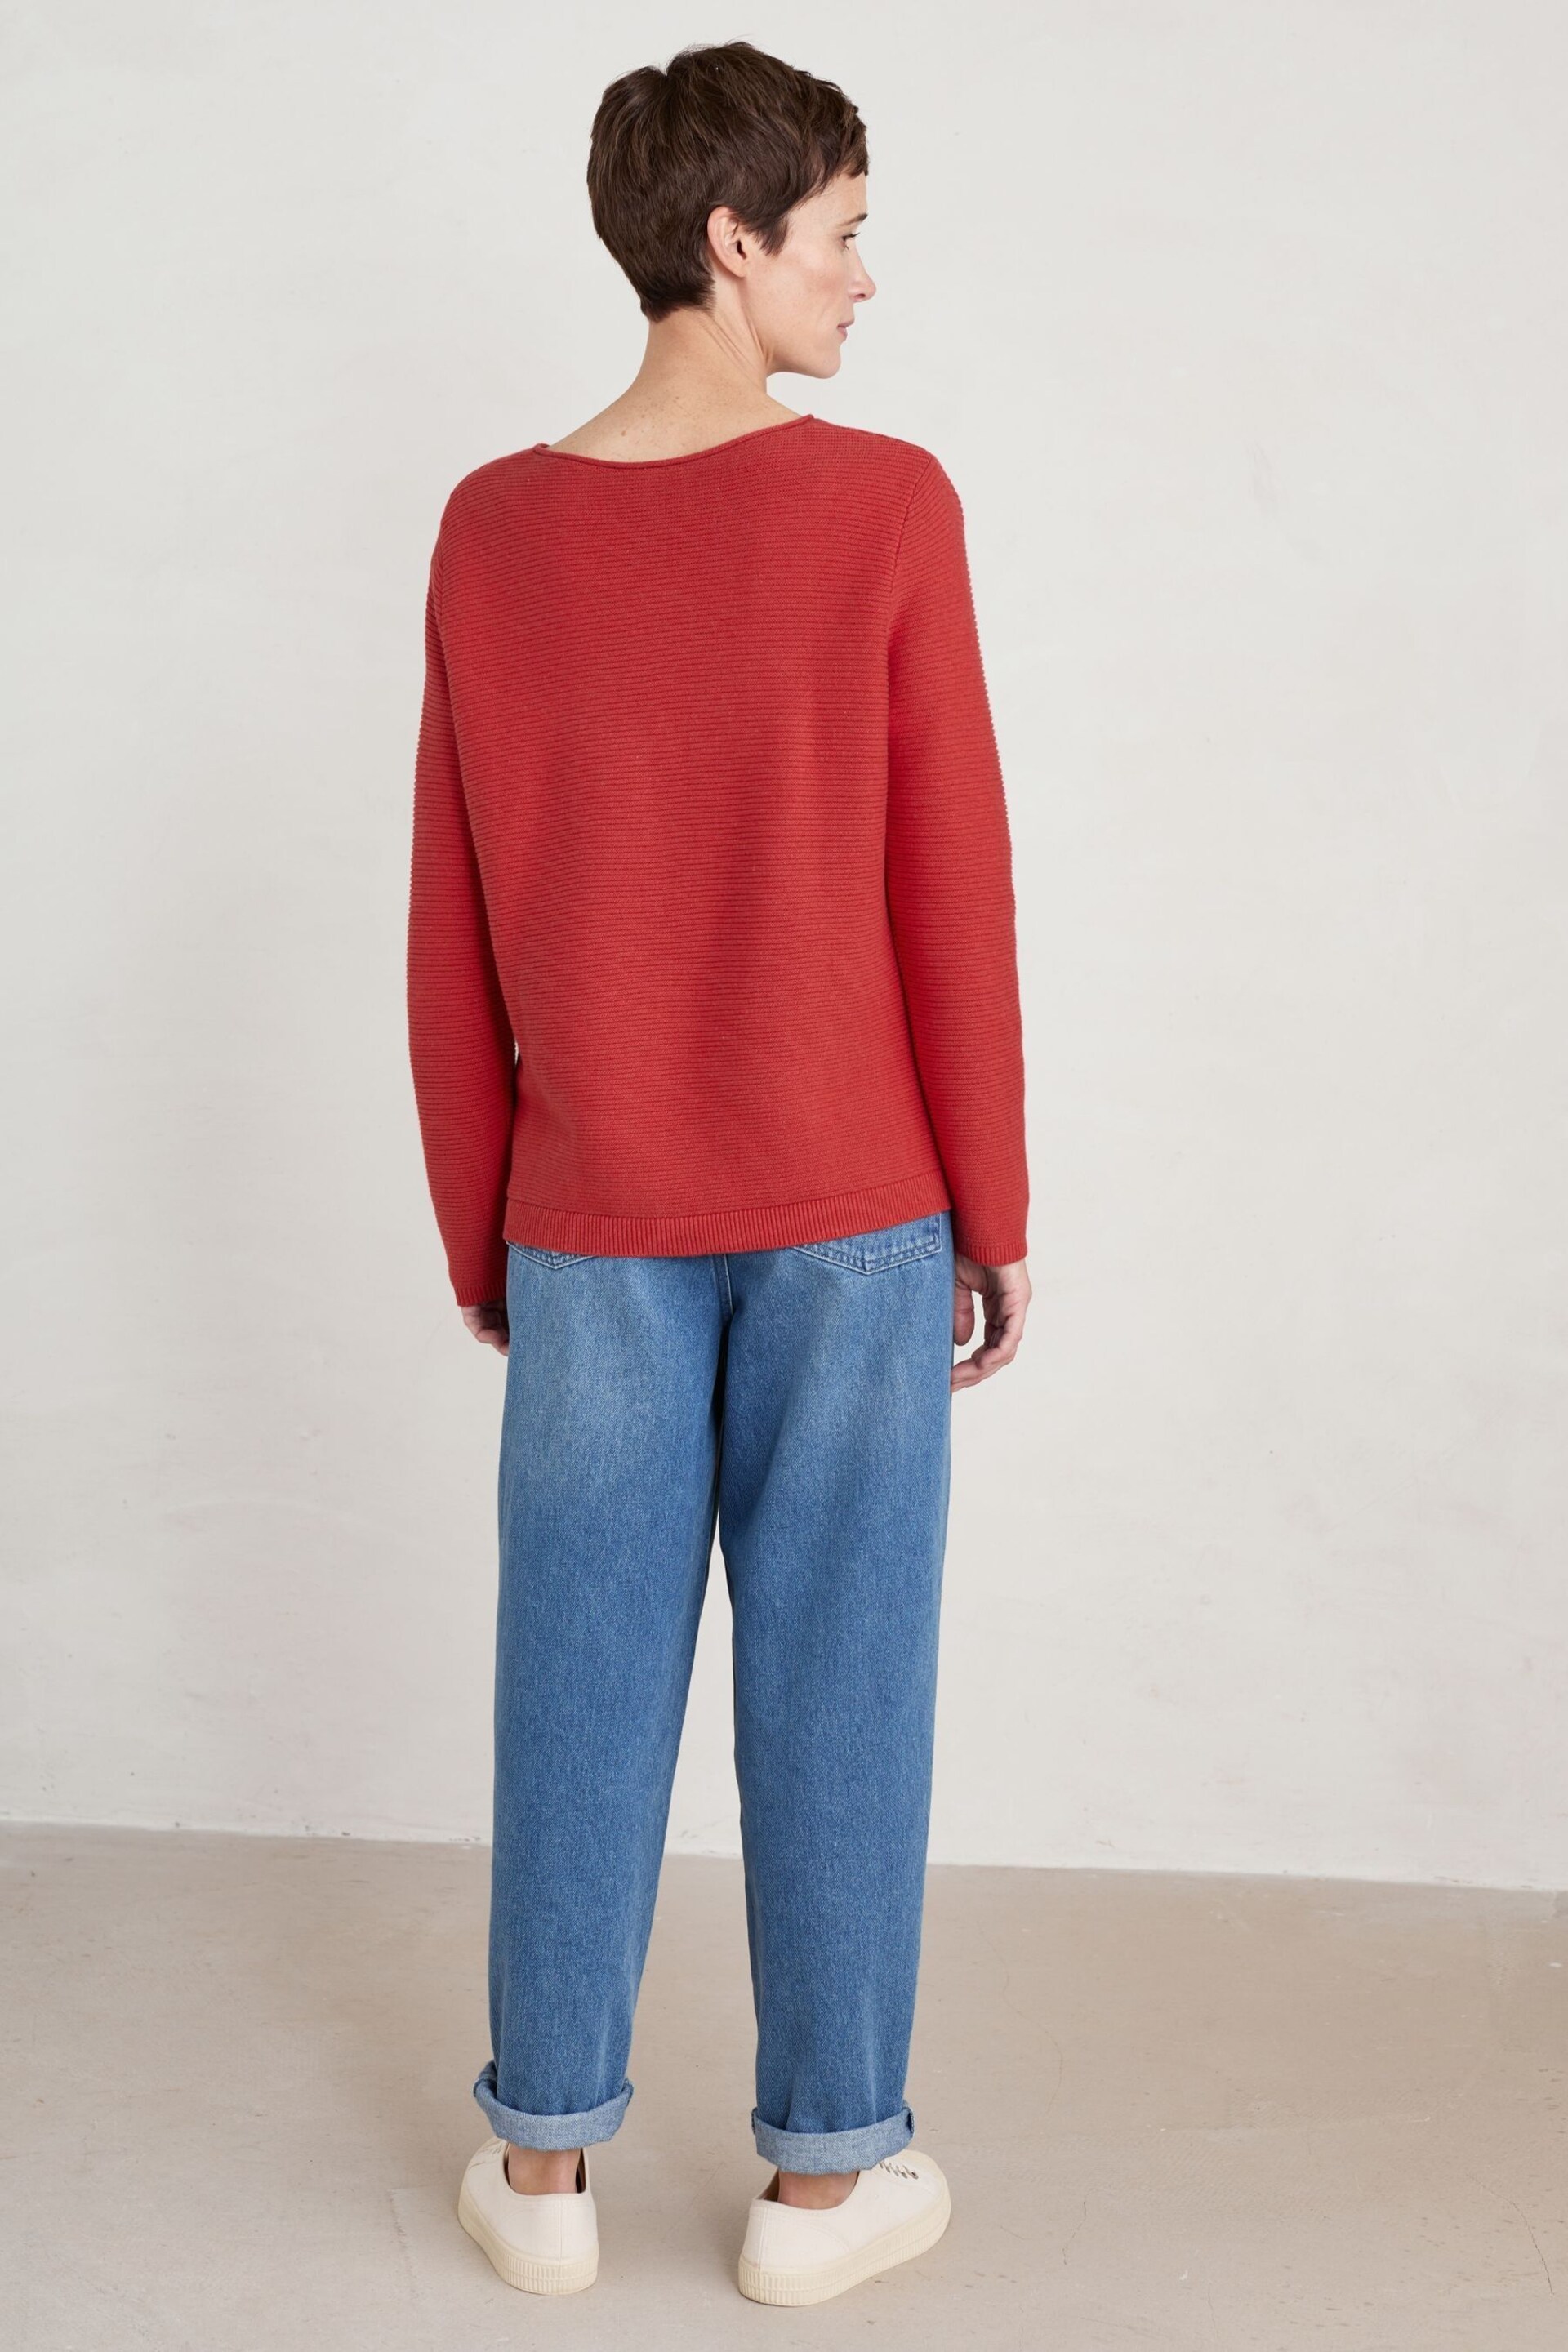 Seasalt Cornwall Red Makers Cotton Jumper - Image 2 of 5